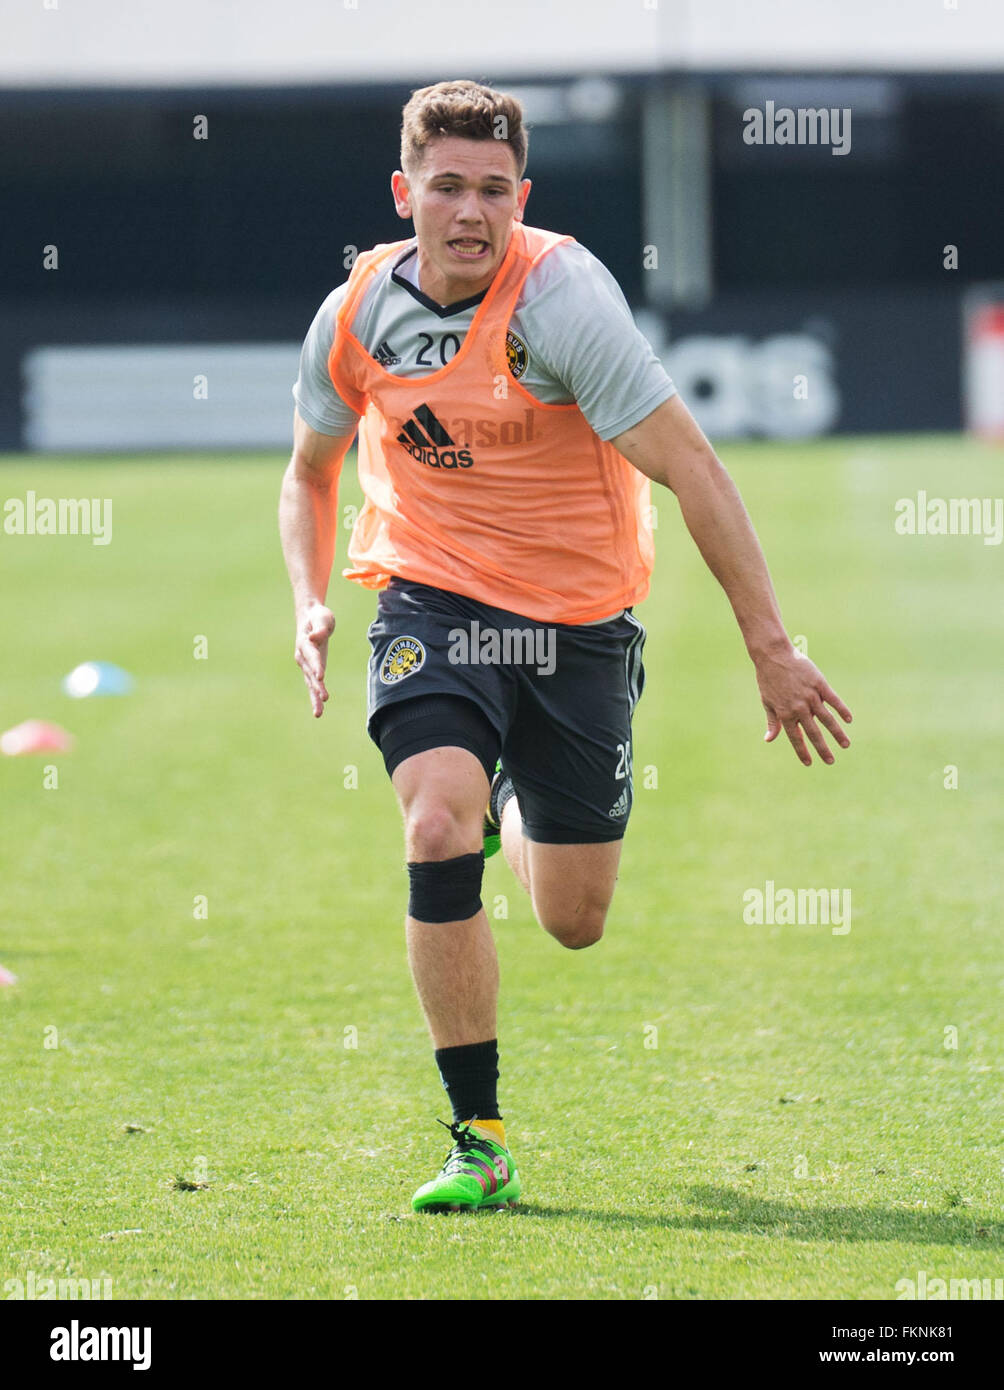 Columbus, Ohio, USA. 9th March, 2016. Columbus Crew SC midfielder Wil Trapp (20) charges down the pitch during a sprinting drill at Columbus Crew SC Media Day. Columbus, Ohio, USA Credit:  Brent Clark/Alamy Live News Stock Photo